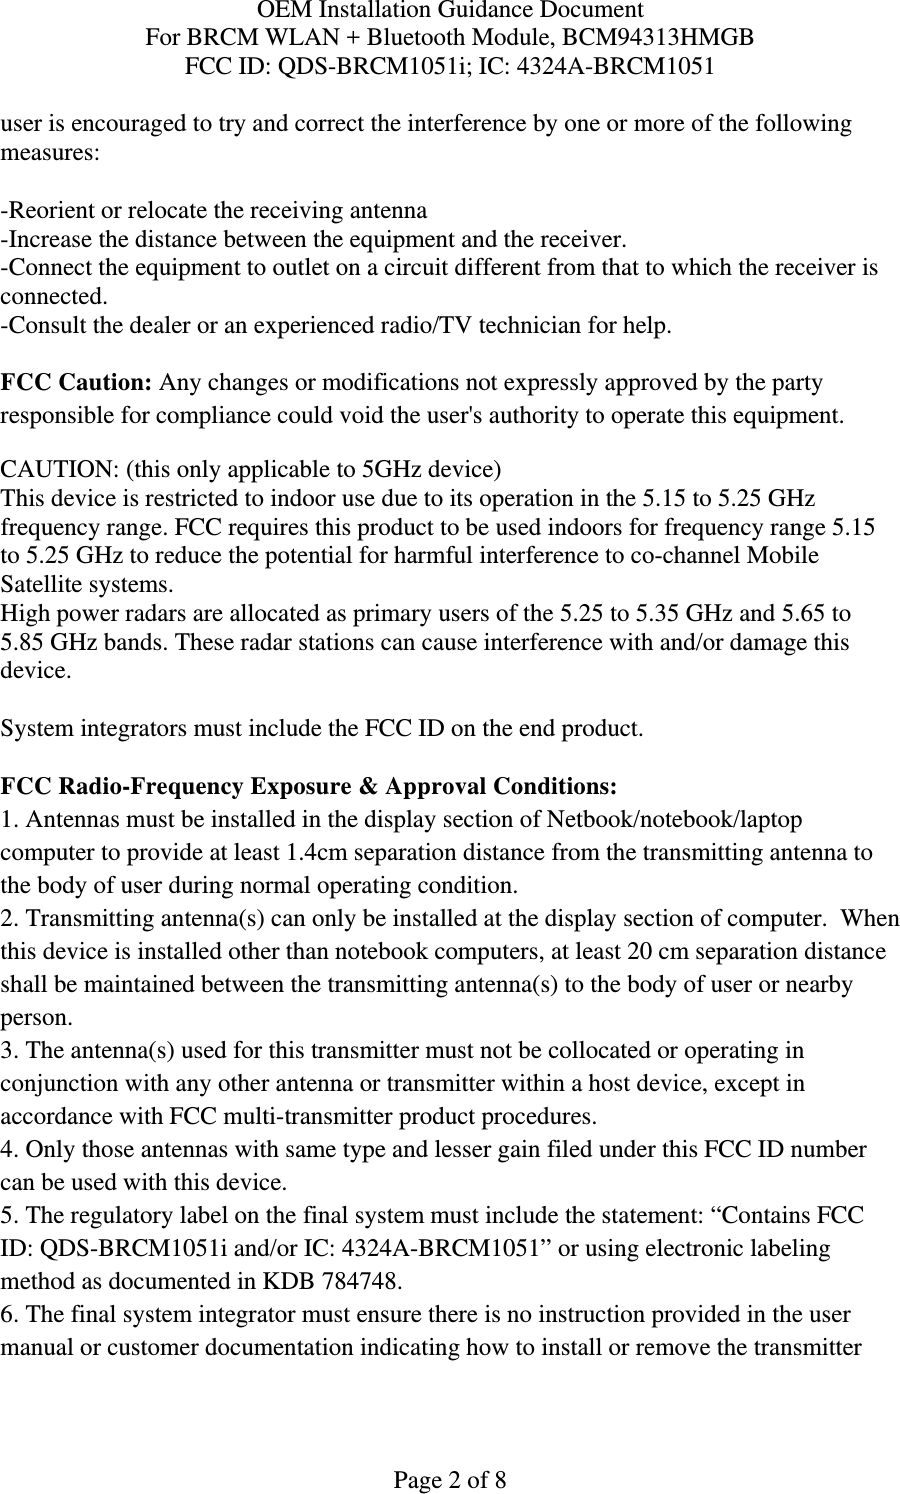 OEM Installation Guidance Document For BRCM WLAN + Bluetooth Module, BCM94313HMGB FCC ID: QDS-BRCM1051i; IC: 4324A-BRCM1051  Page 2 of 8 user is encouraged to try and correct the interference by one or more of the following measures:   -Reorient or relocate the receiving antenna -Increase the distance between the equipment and the receiver. -Connect the equipment to outlet on a circuit different from that to which the receiver is connected. -Consult the dealer or an experienced radio/TV technician for help.  FCC Caution: Any changes or modifications not expressly approved by the party responsible for compliance could void the user&apos;s authority to operate this equipment. CAUTION: (this only applicable to 5GHz device) This device is restricted to indoor use due to its operation in the 5.15 to 5.25 GHz frequency range. FCC requires this product to be used indoors for frequency range 5.15 to 5.25 GHz to reduce the potential for harmful interference to co-channel Mobile Satellite systems. High power radars are allocated as primary users of the 5.25 to 5.35 GHz and 5.65 to 5.85 GHz bands. These radar stations can cause interference with and/or damage this device.  System integrators must include the FCC ID on the end product.   FCC Radio-Frequency Exposure &amp; Approval Conditions: 1. Antennas must be installed in the display section of Netbook/notebook/laptop computer to provide at least 1.4cm separation distance from the transmitting antenna to the body of user during normal operating condition. 2. Transmitting antenna(s) can only be installed at the display section of computer.  When this device is installed other than notebook computers, at least 20 cm separation distance shall be maintained between the transmitting antenna(s) to the body of user or nearby person. 3. The antenna(s) used for this transmitter must not be collocated or operating in conjunction with any other antenna or transmitter within a host device, except in accordance with FCC multi-transmitter product procedures. 4. Only those antennas with same type and lesser gain filed under this FCC ID number can be used with this device. 5. The regulatory label on the final system must include the statement: “Contains FCC ID: QDS-BRCM1051i and/or IC: 4324A-BRCM1051” or using electronic labeling method as documented in KDB 784748. 6. The final system integrator must ensure there is no instruction provided in the user manual or customer documentation indicating how to install or remove the transmitter 